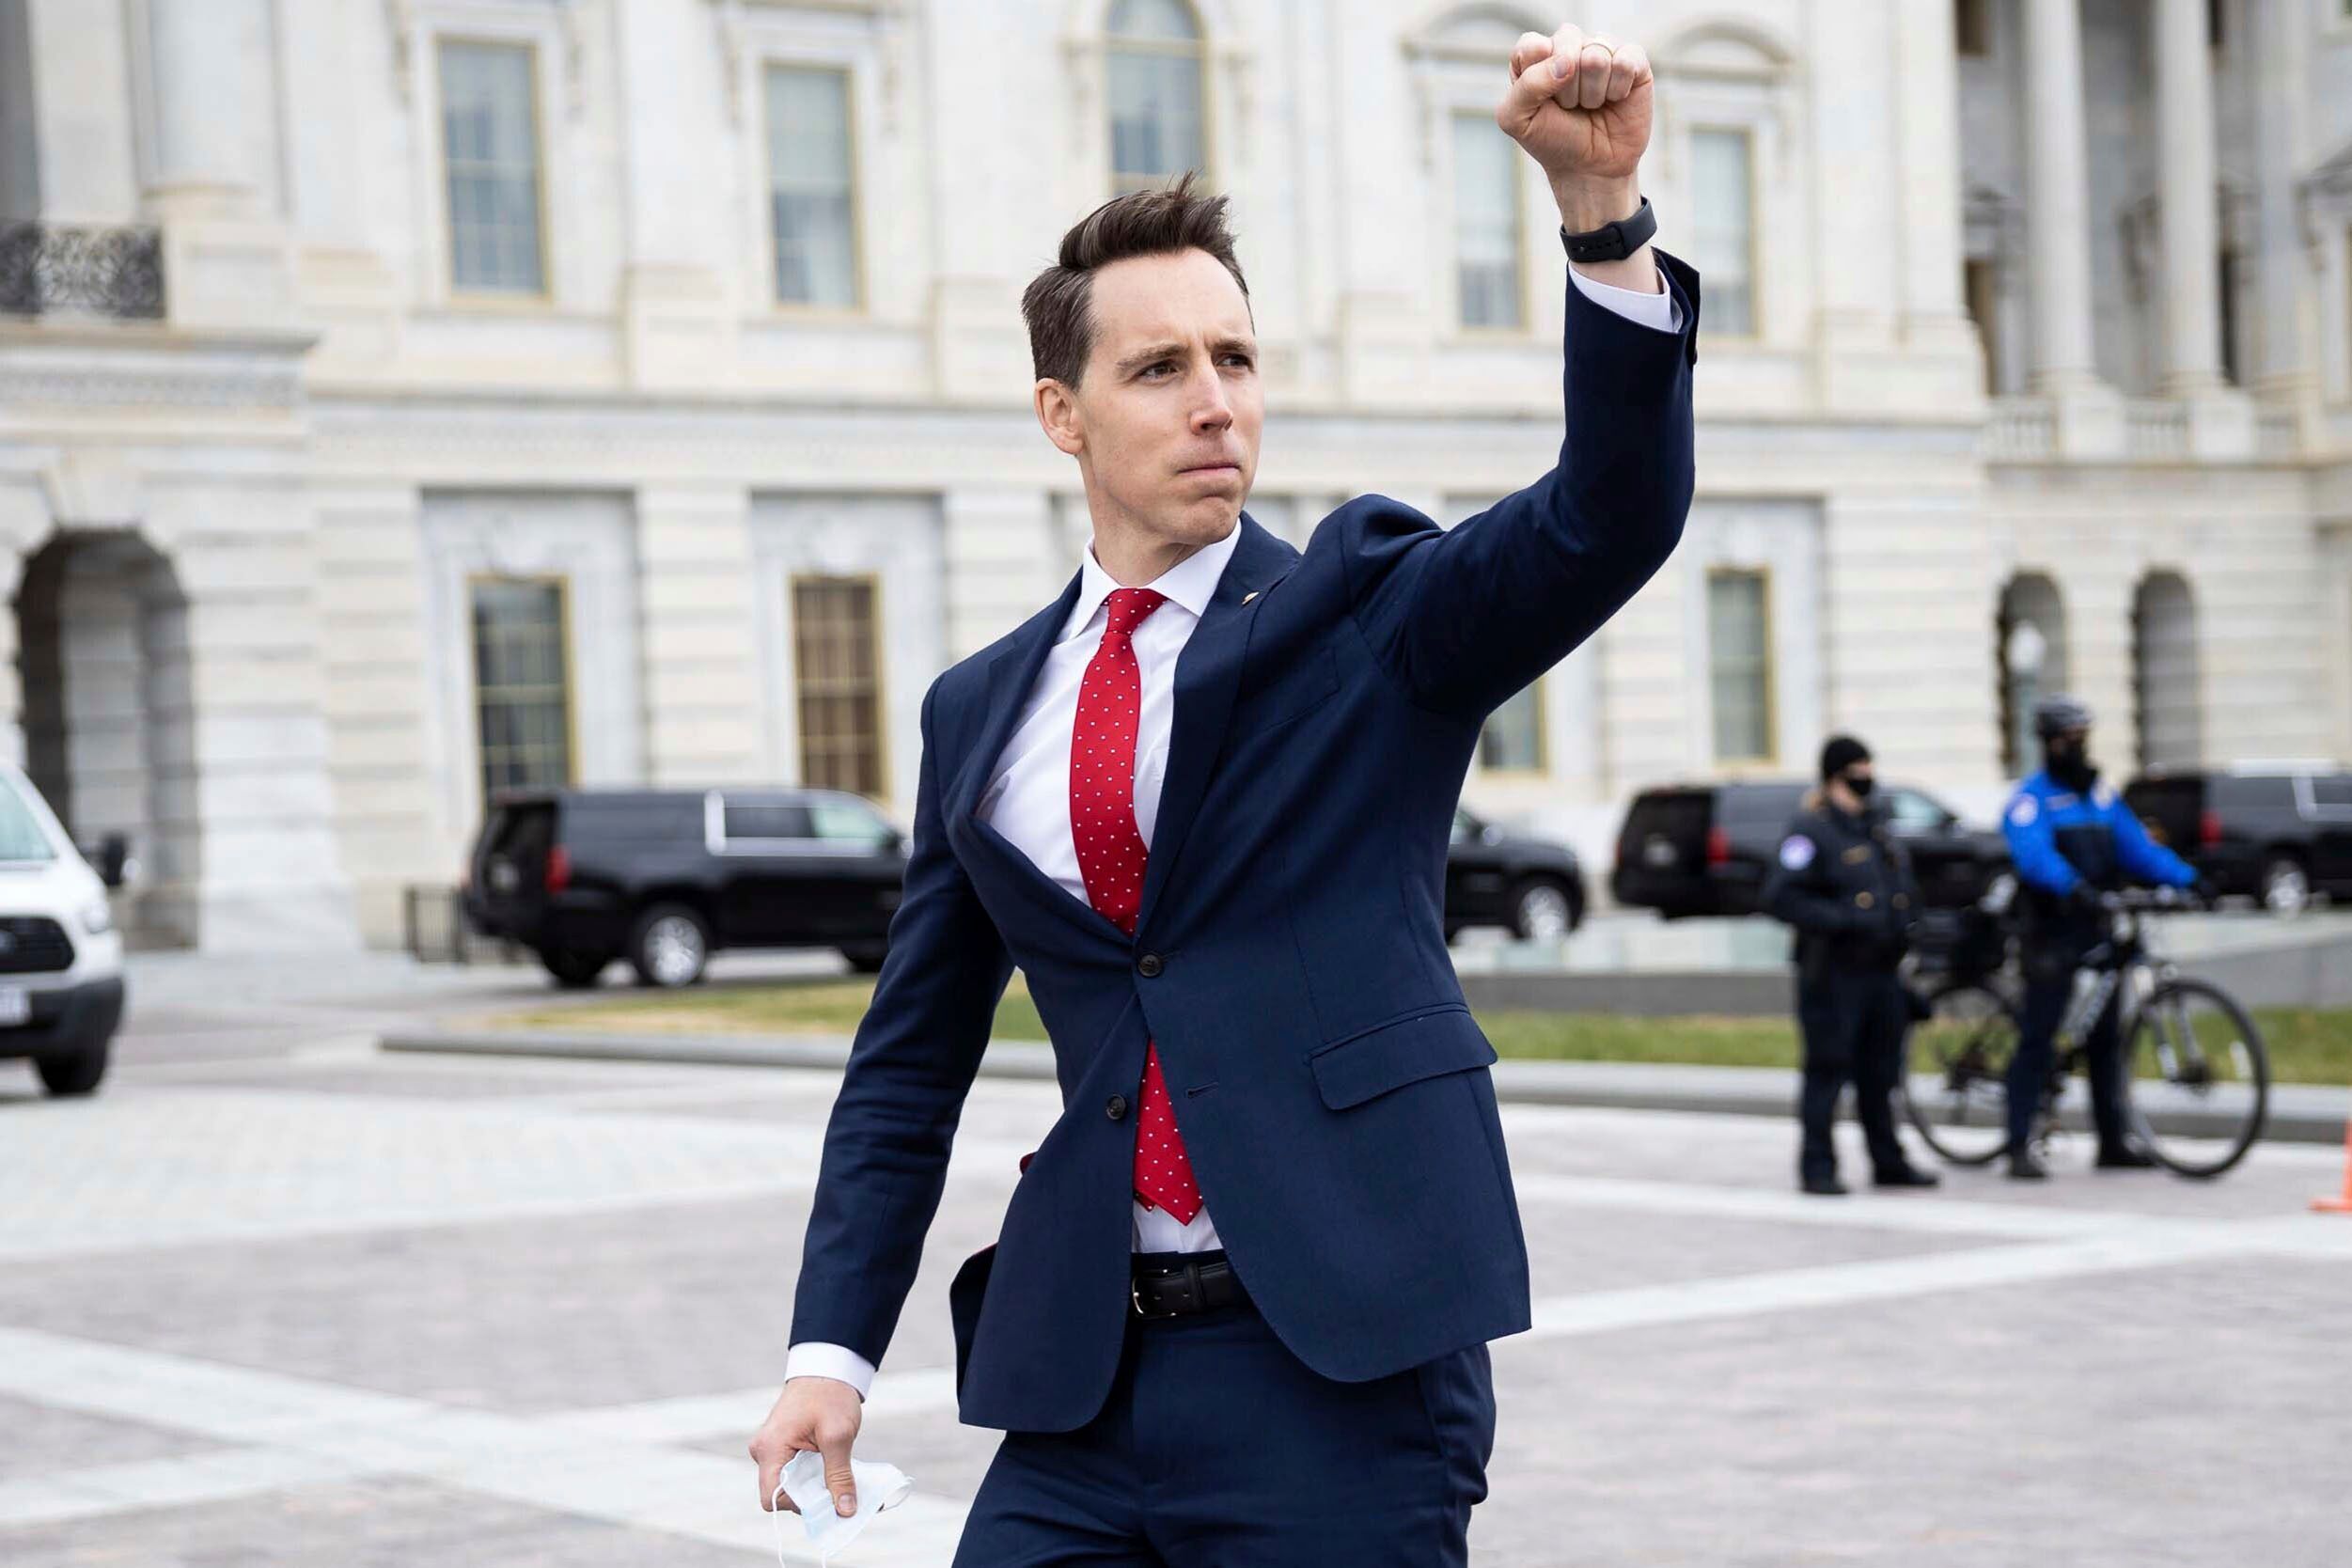 st louis newspaper bashes gop josh hawley for contempt of democracy 1